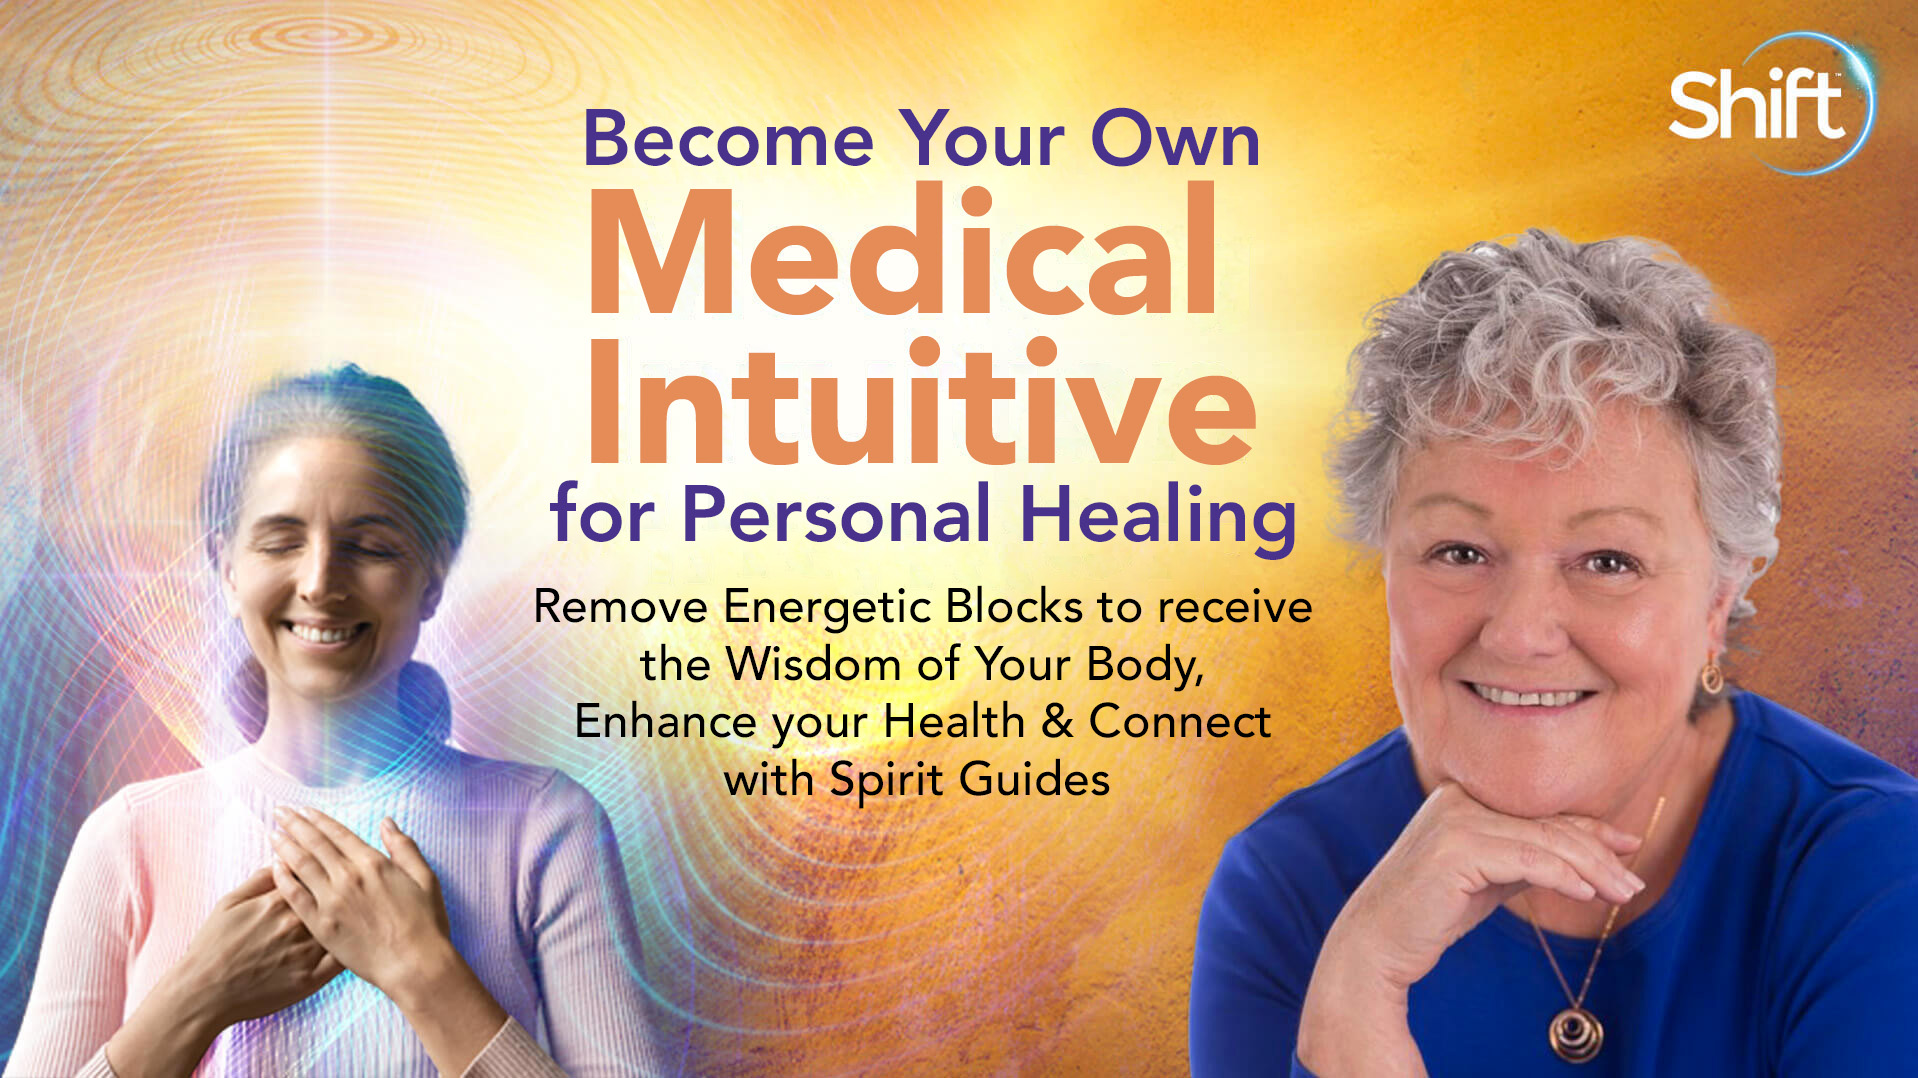 Become Your Own Medical Intuitive for Personal Healing Tina Zion course at Shift Network